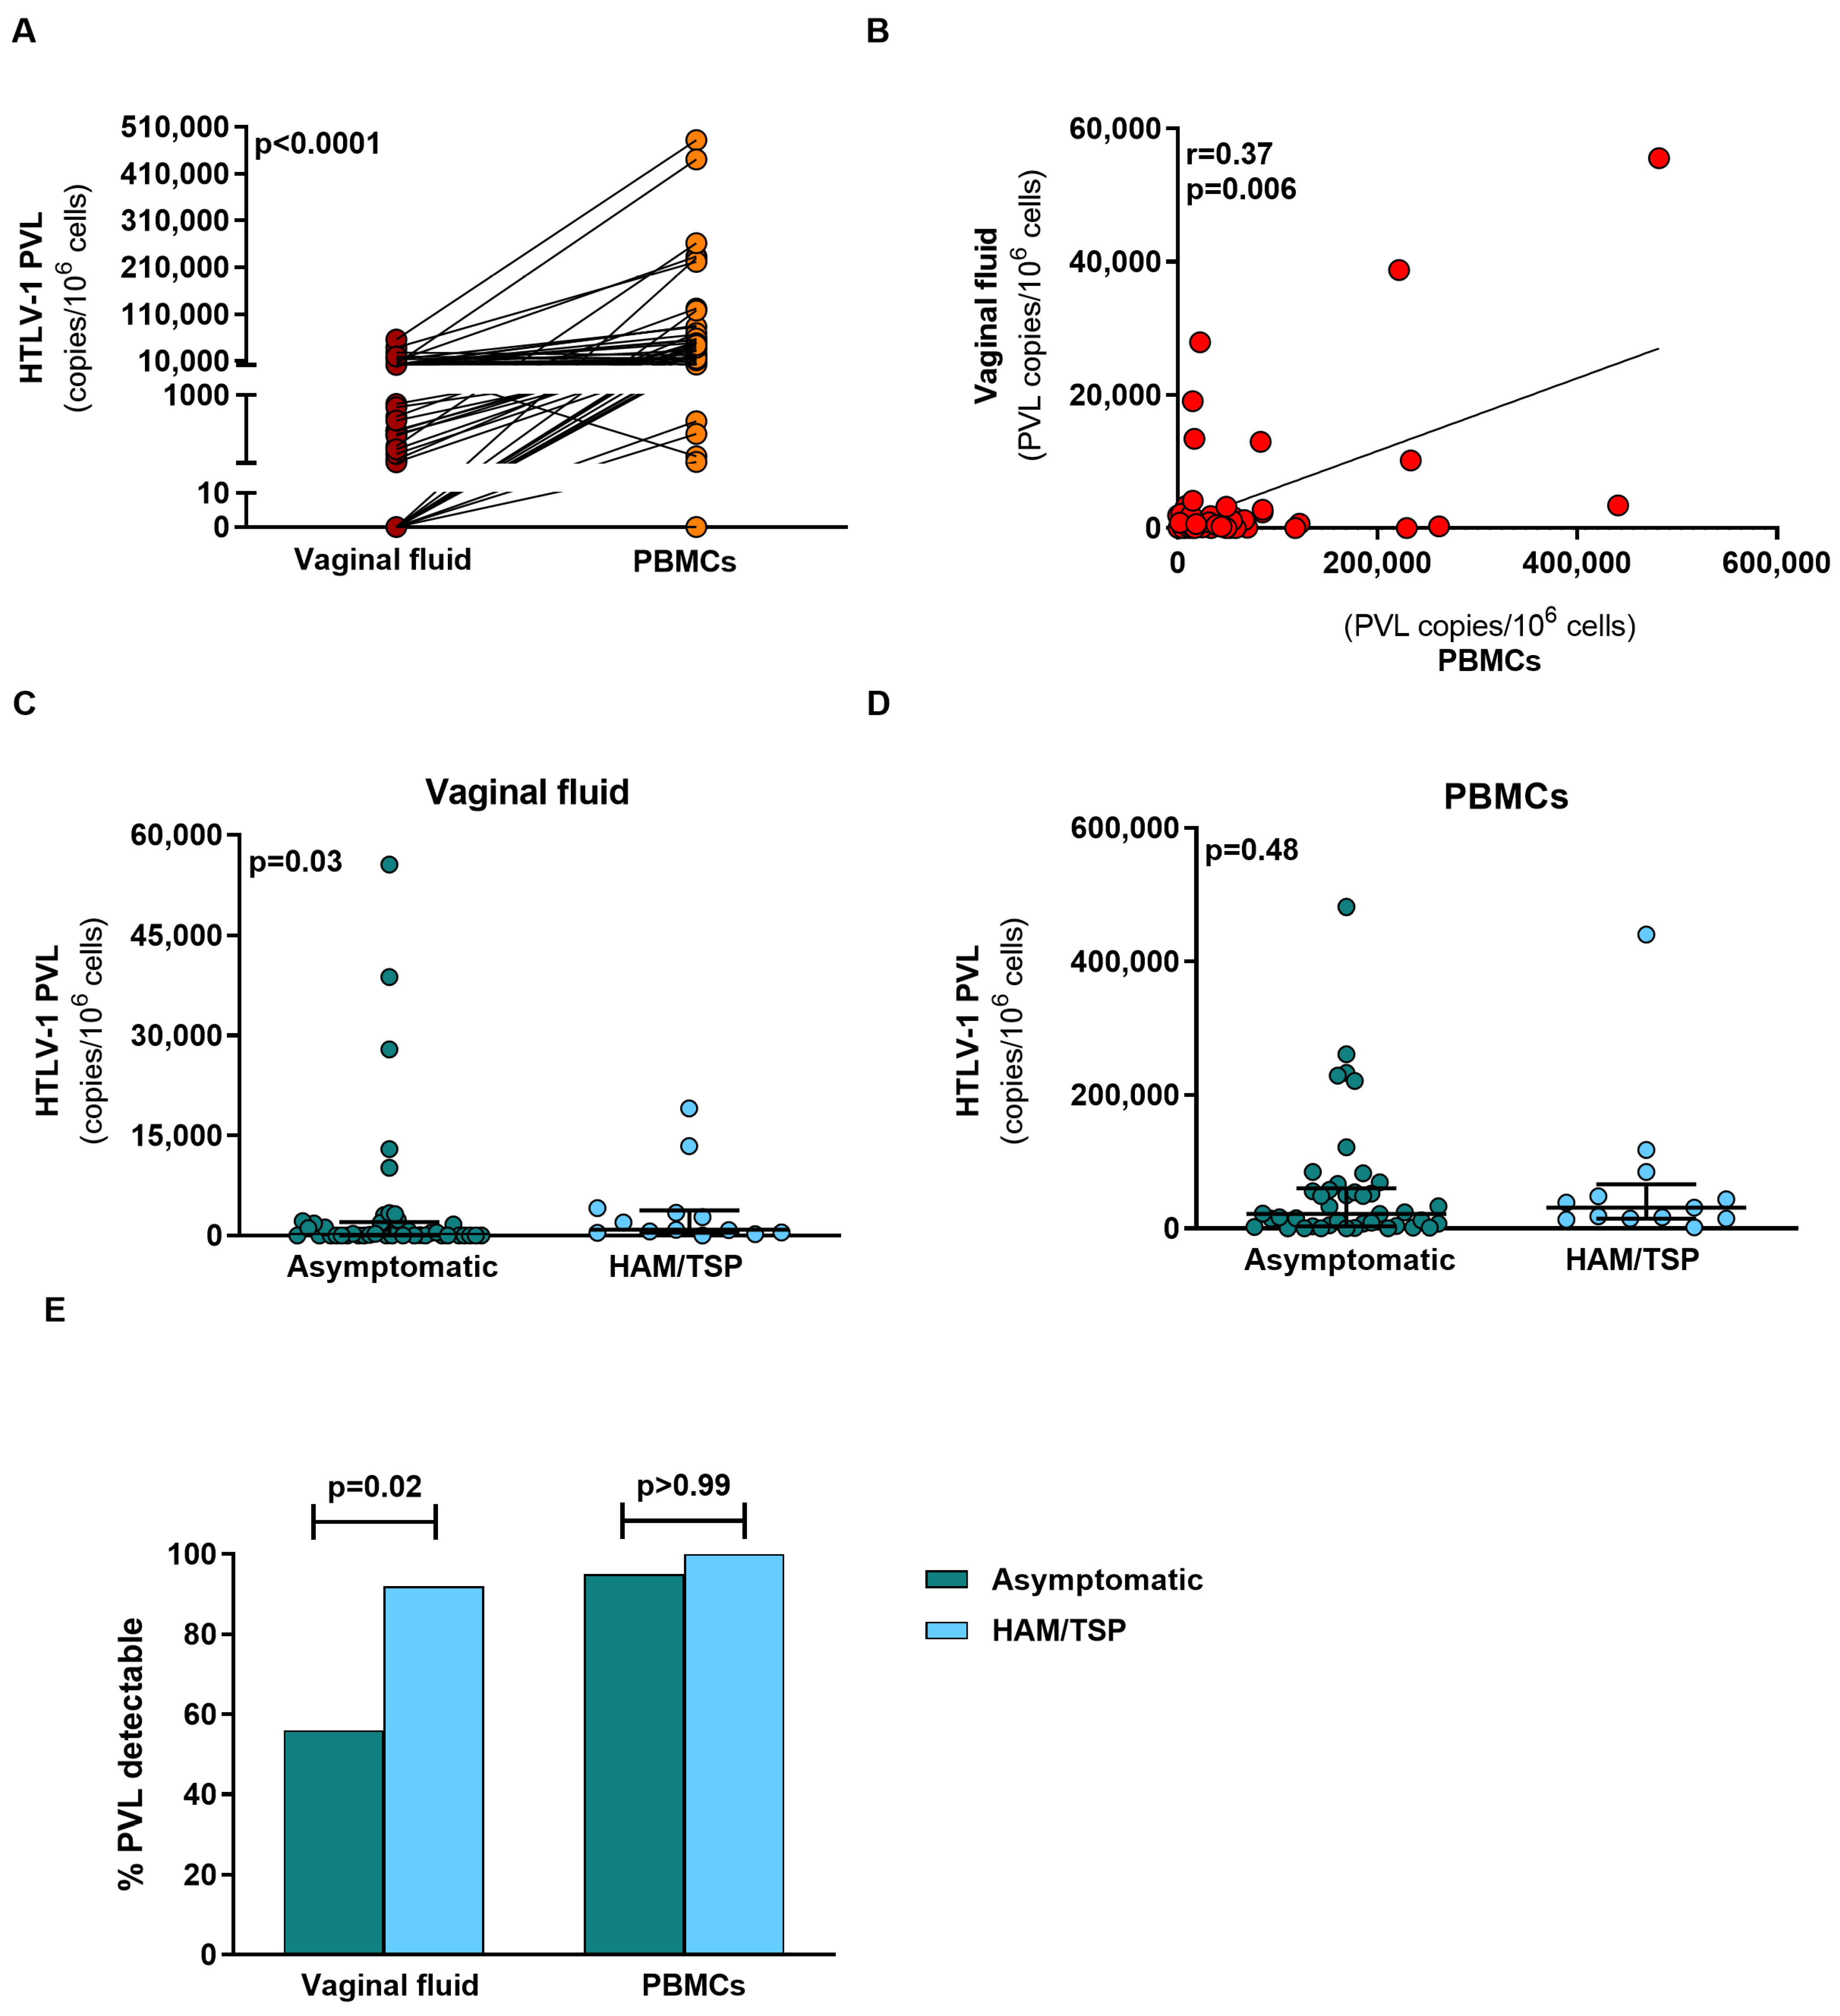 Pathogens | Free Full-Text | HTLV-1 Proviral Load in Vaginal Fluid  Correlates with Levels in Peripheral Blood Mononuclear Cells